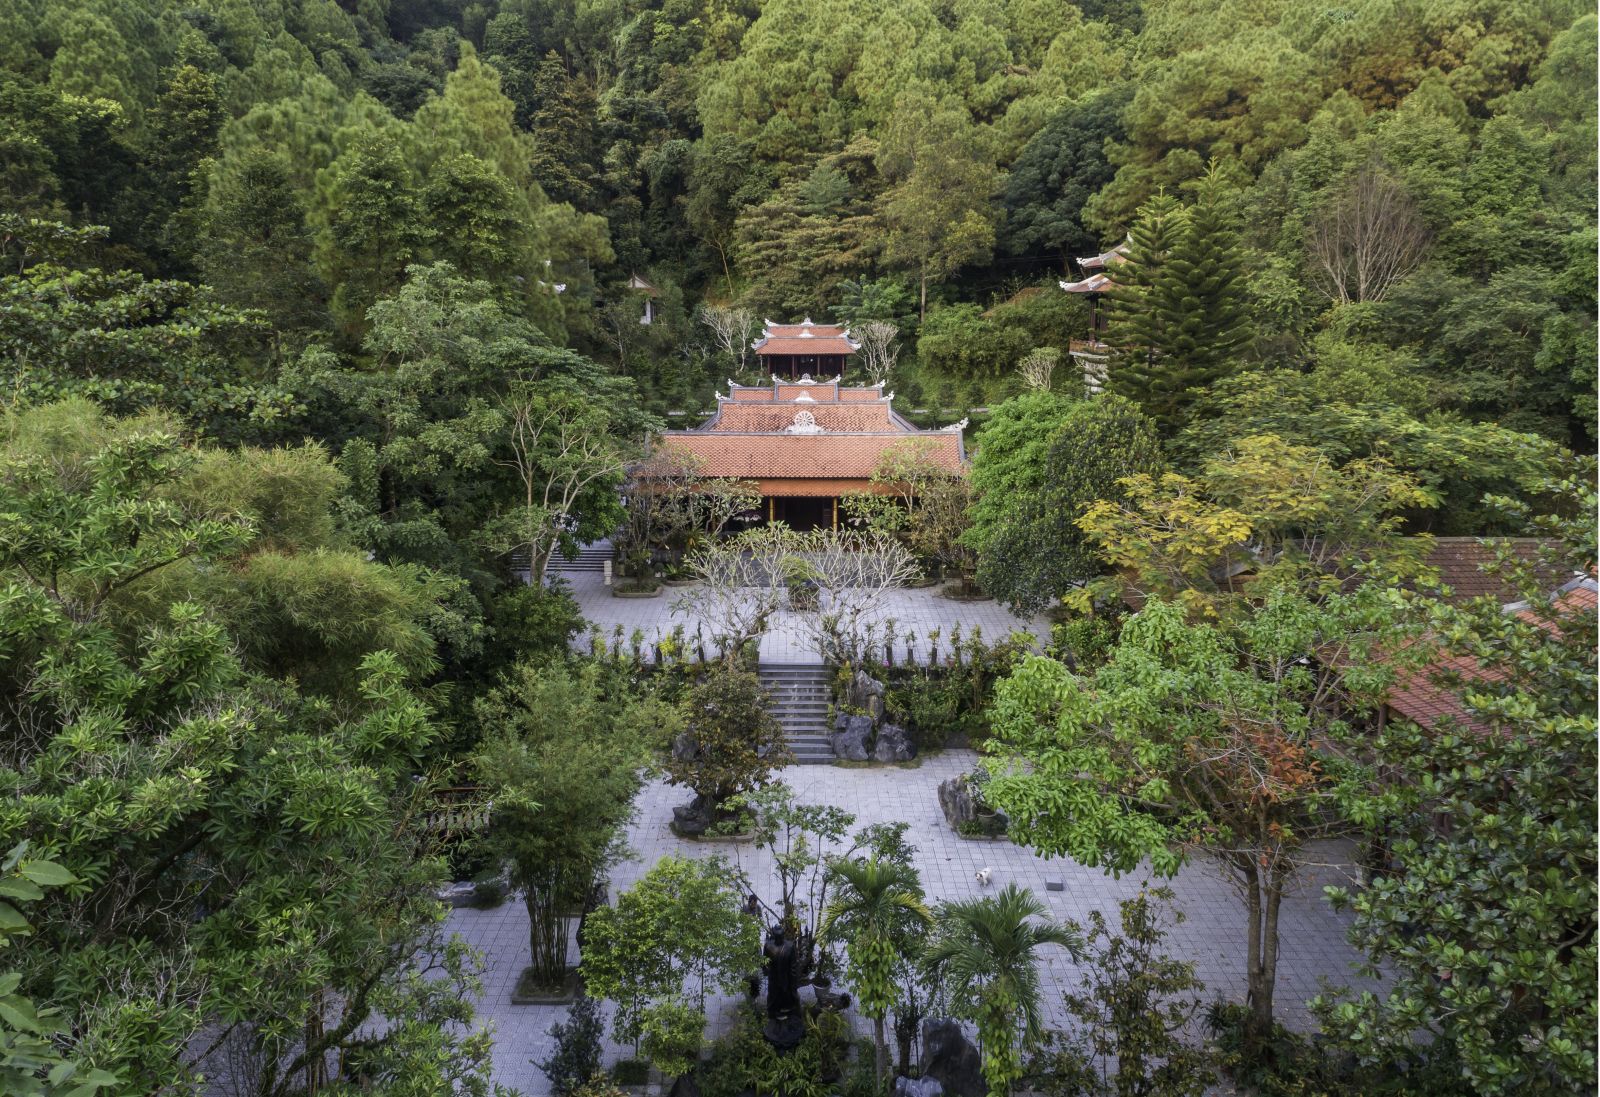 Panoramic view of the pagoda from above